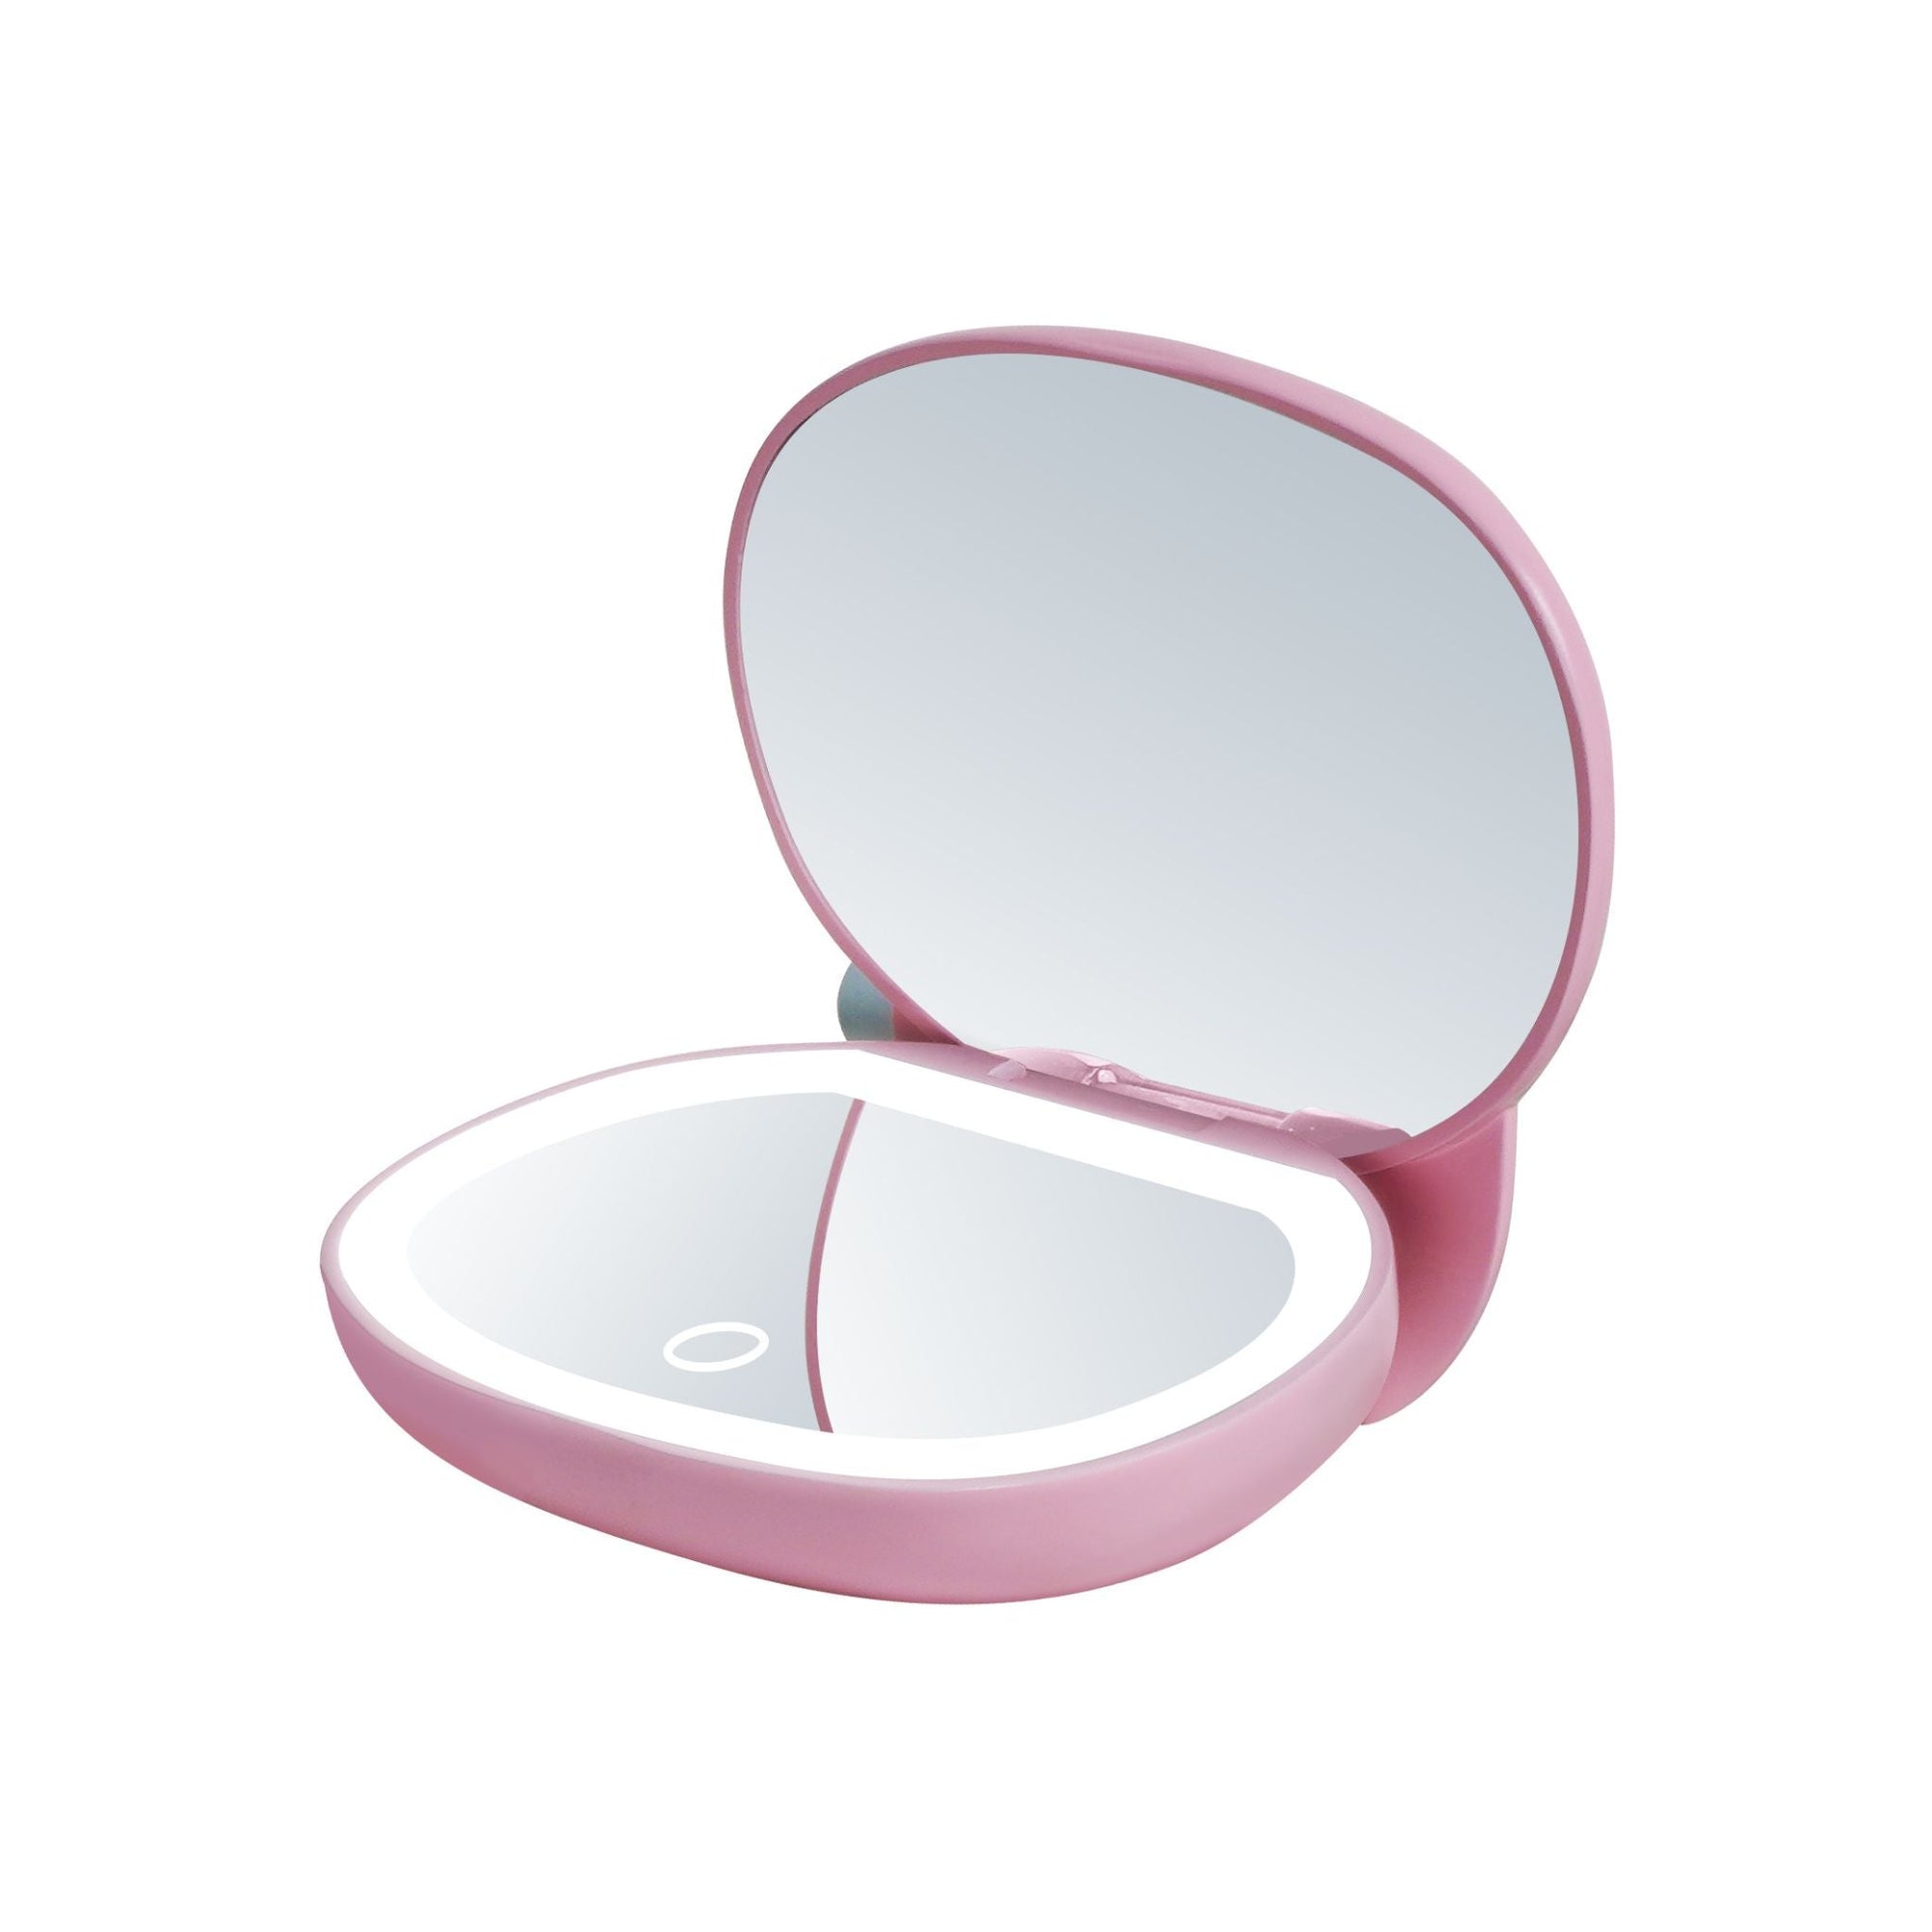 My Melody x Impressions Vanity LED Compact Mirror Makeup Mirrors Impressions Vanity Co.   